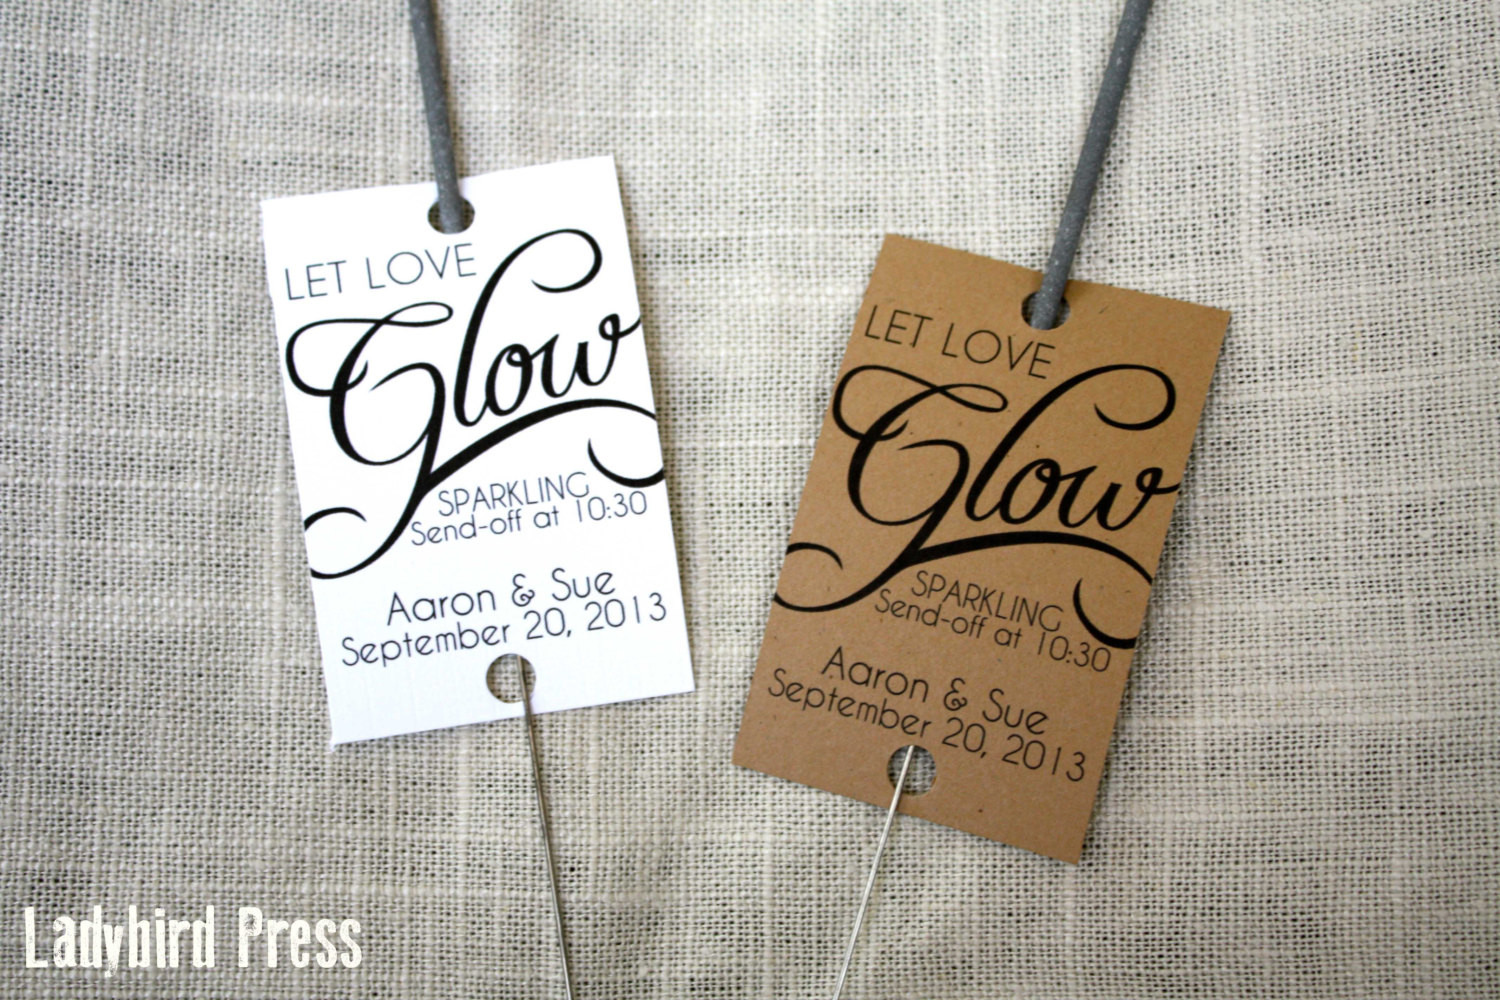 Sparklers Wedding Favor
 Personalized Printable Wedding Favor Tag for Sparkler Send off